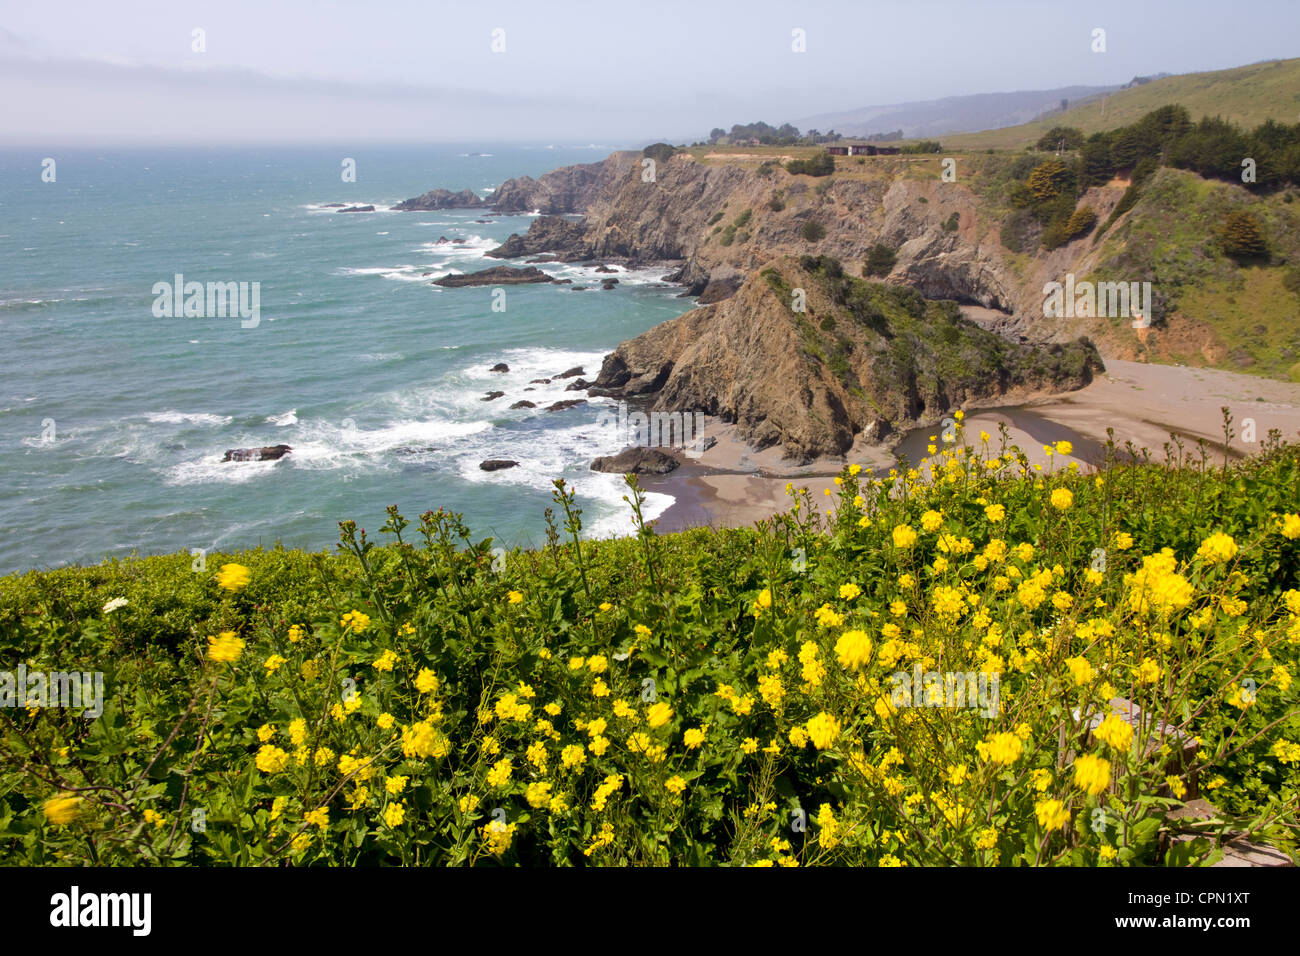 California poppies crowd a bluff overlooking the Pacific near Mendocino, CA, USA. Stock Photo